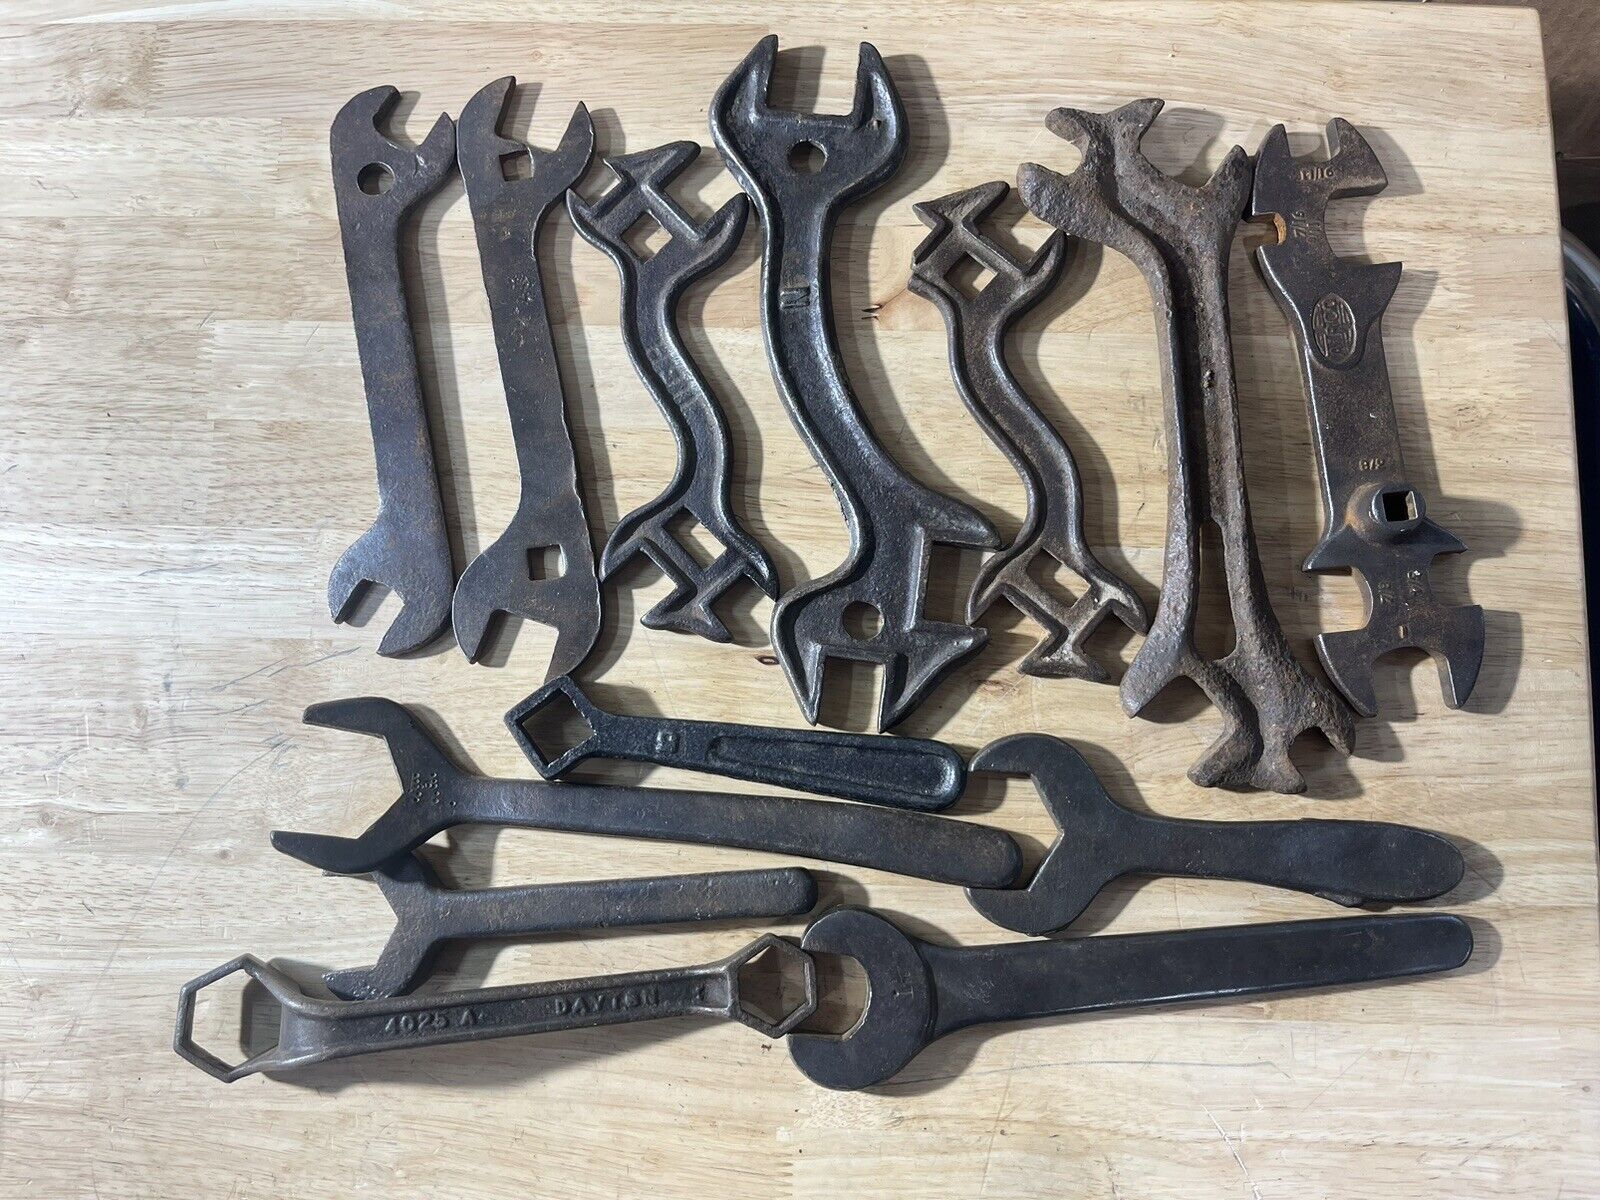 Large Lot Of 13 Implement And Specialty Wrenches Variety ANTIQUE